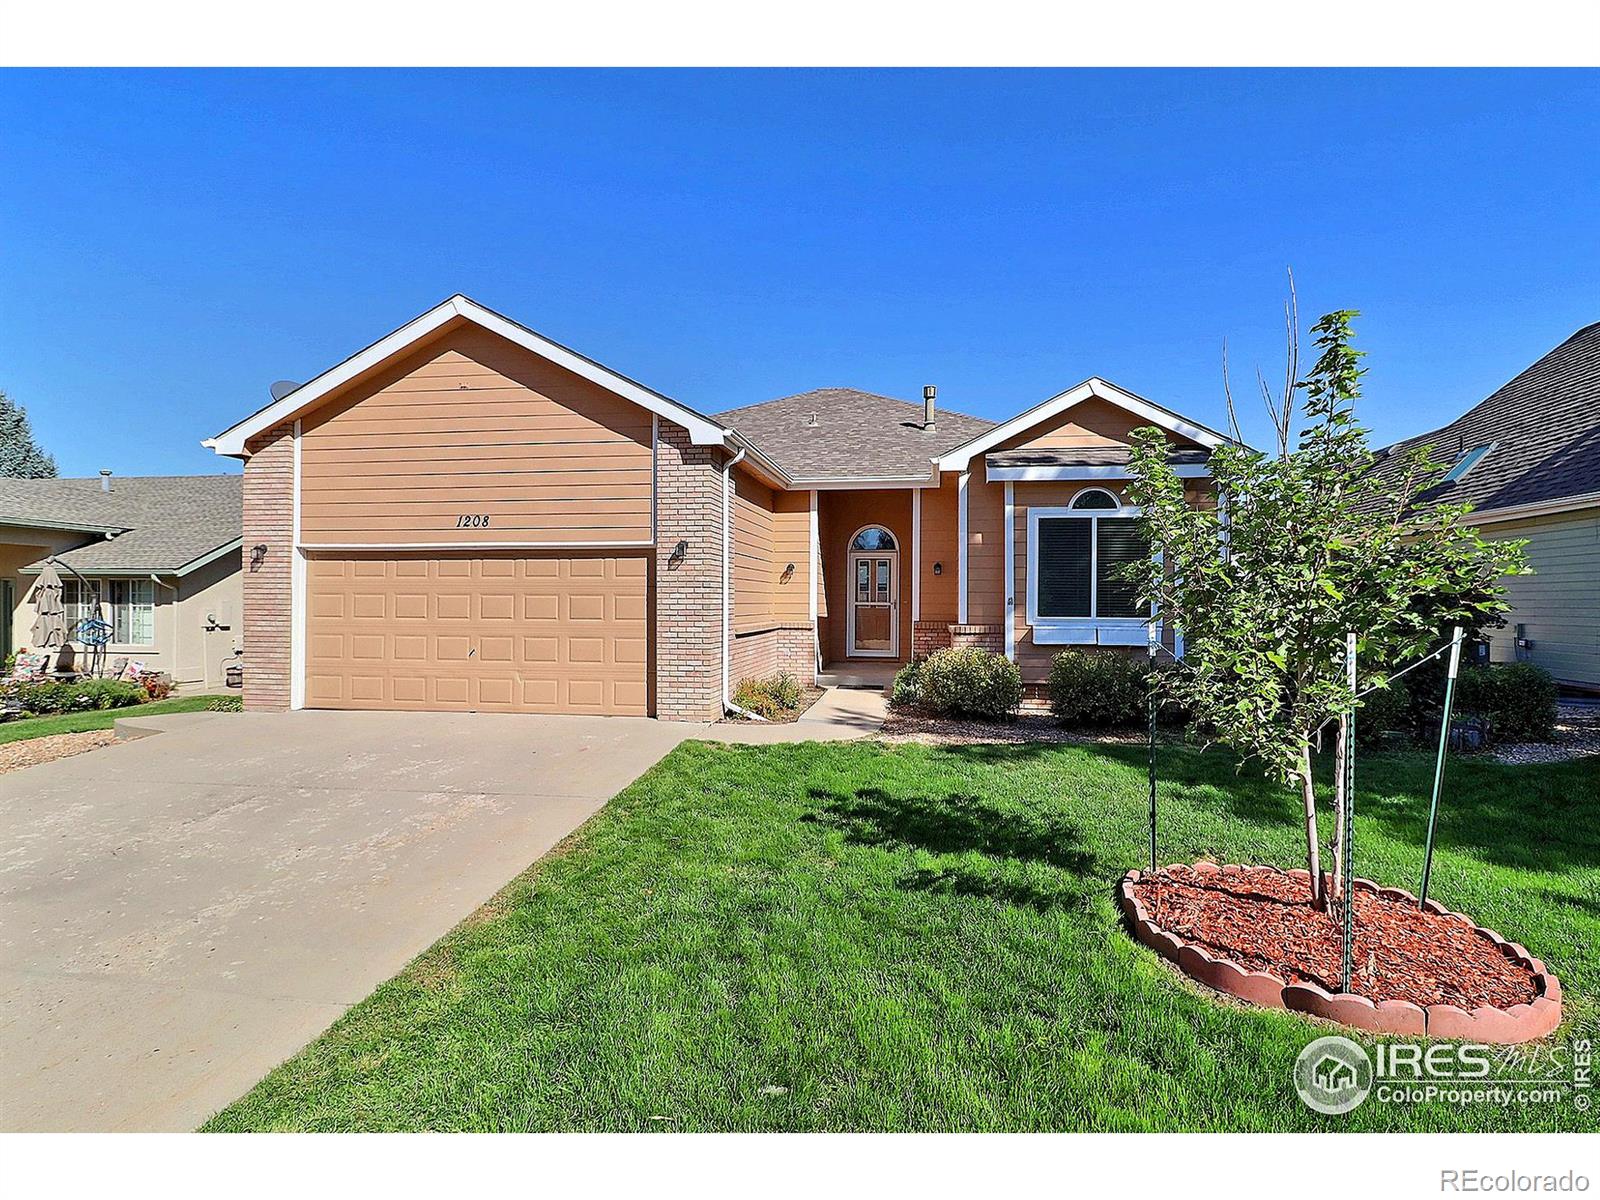 1208  52nd Avenue, greeley MLS: 123456789996997 Beds: 5 Baths: 3 Price: $489,900